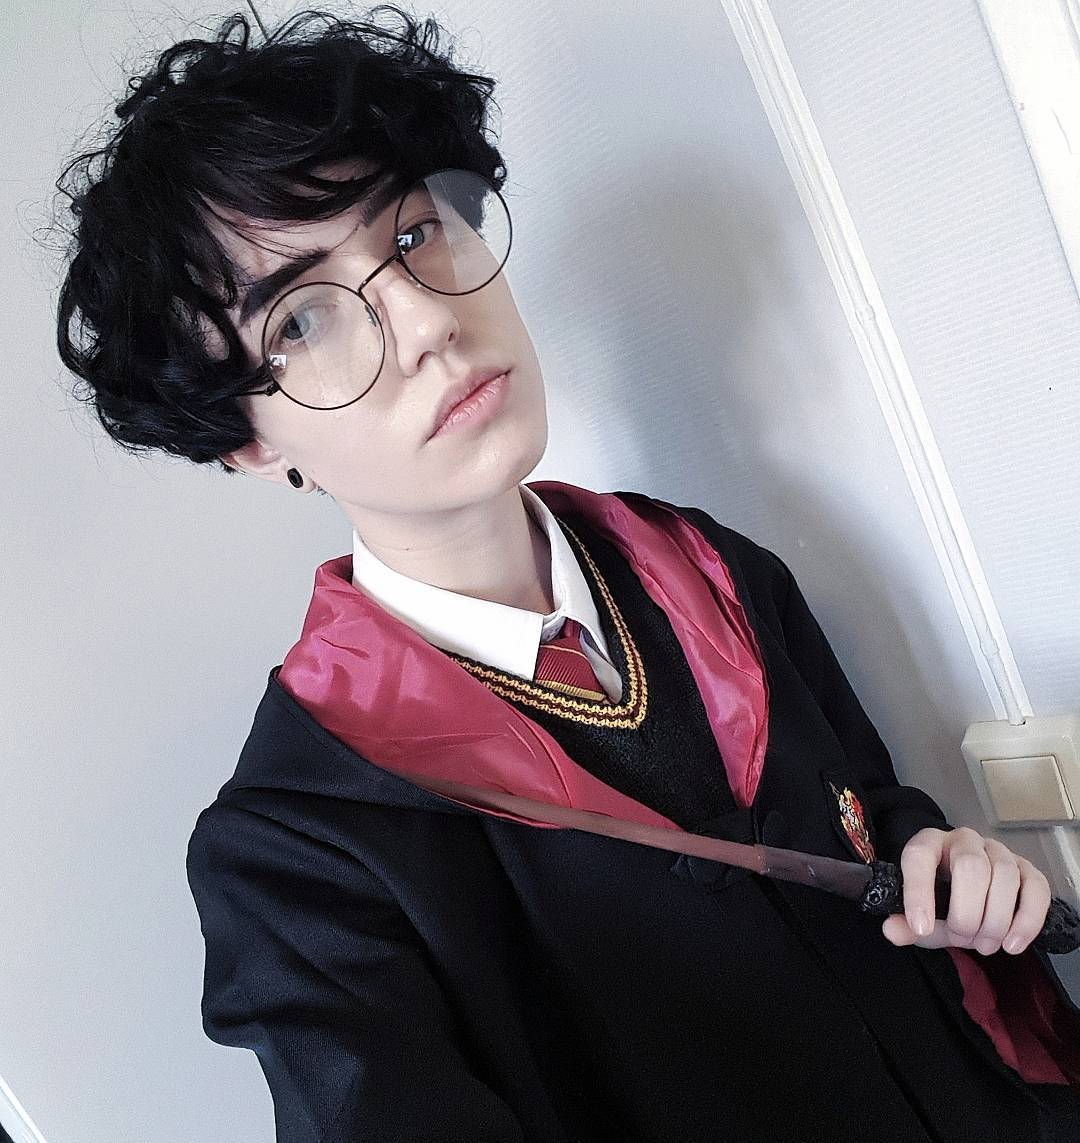 harry potter robes costume taobao 